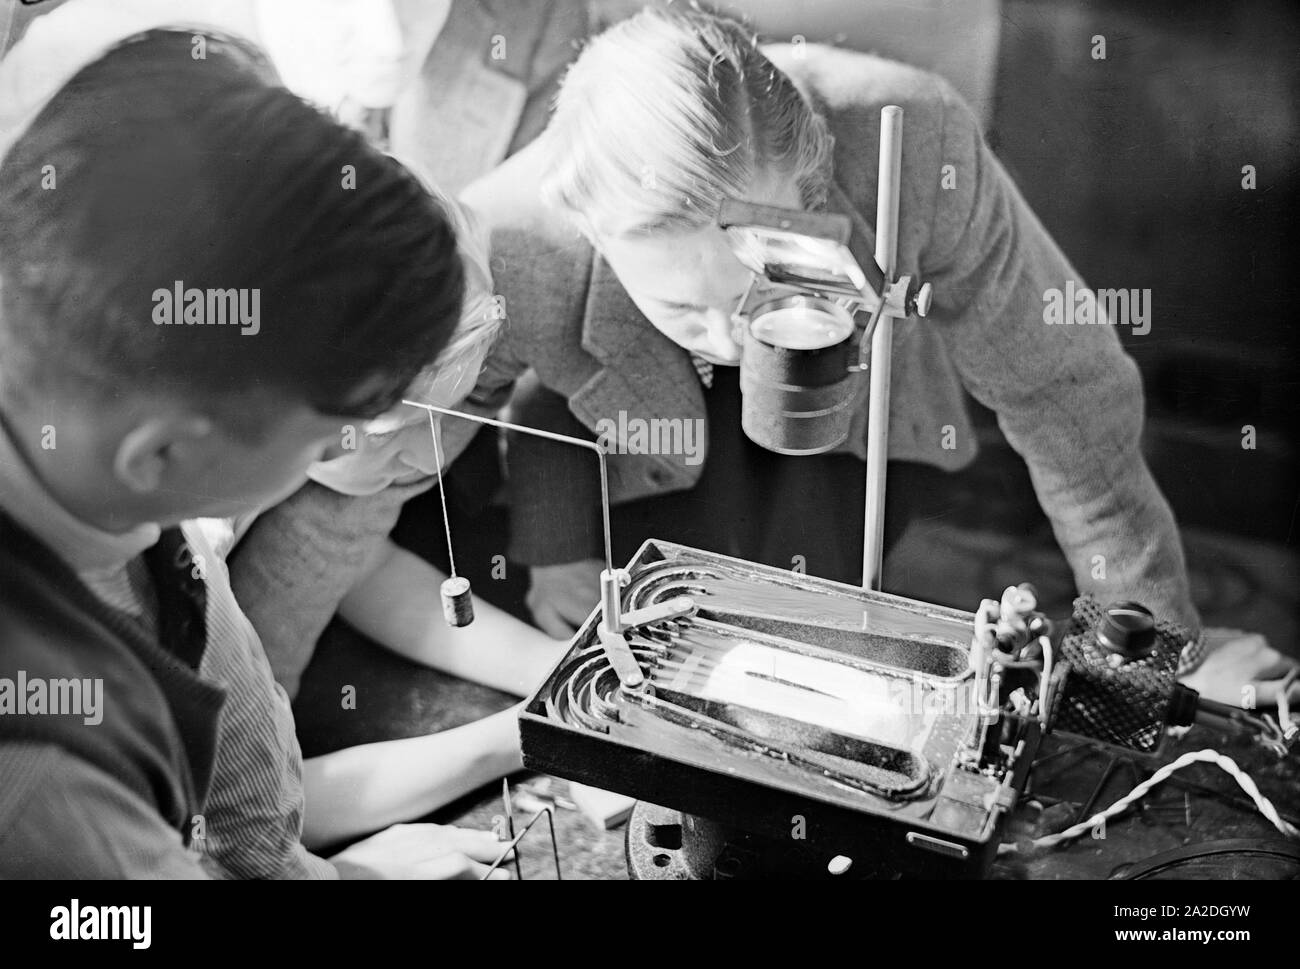 Flugschüler lernen Theorie mit einem Overhead Projektor, Deutschland 1930er Jahre. Pilot trainees learning flight theory with a lecture of an overhead projector, Germany 1930s. Stock Photo